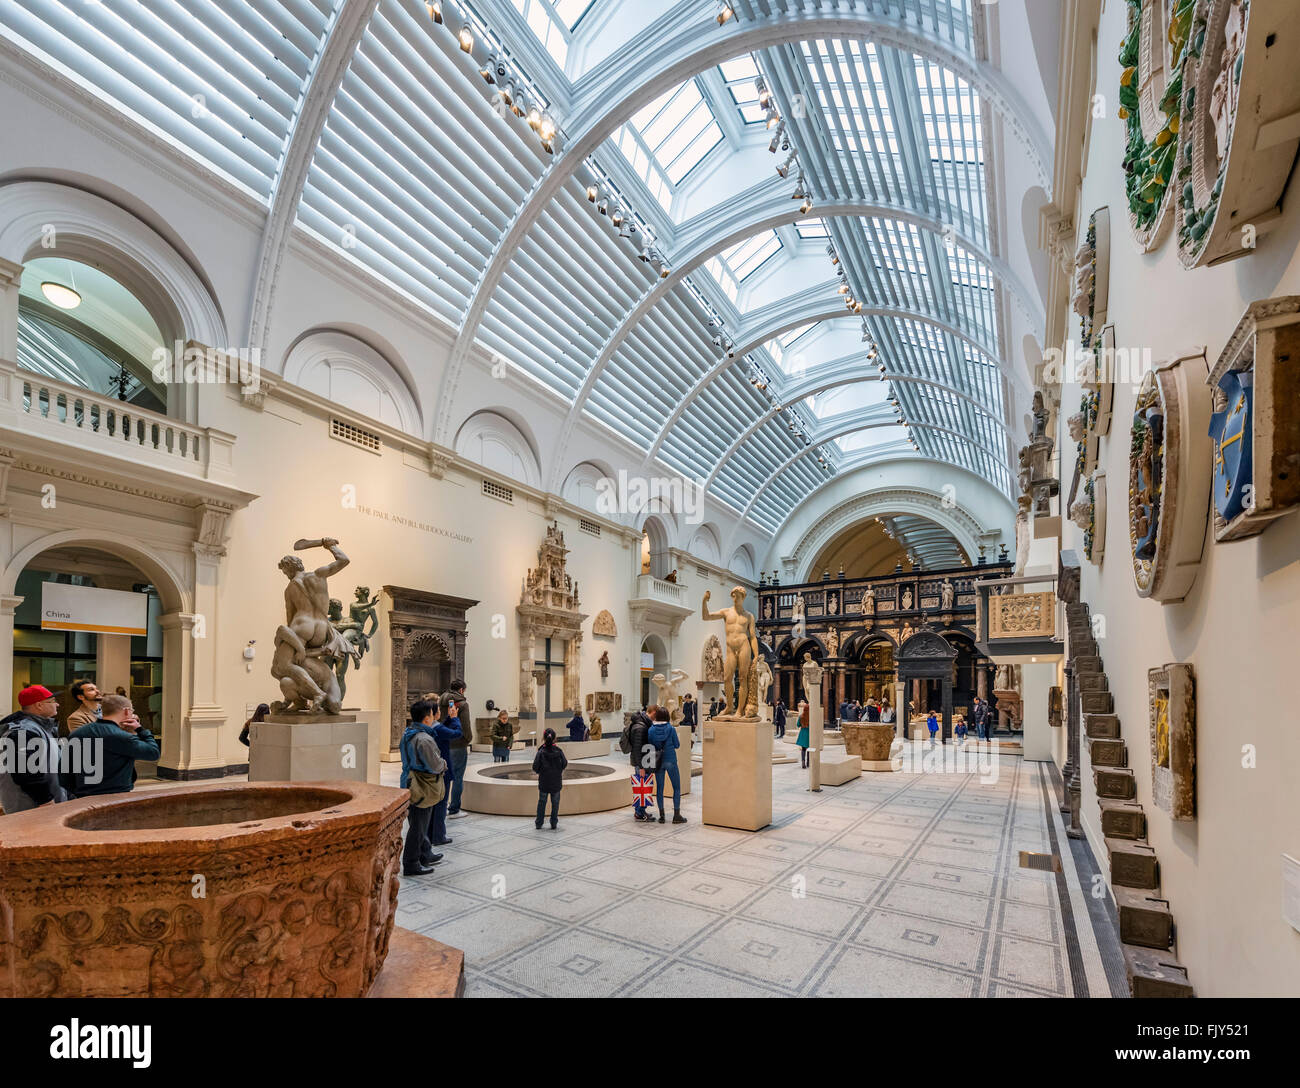 Medieval and Renaissance Gallery, Victoria and Albert Museum, South Kensington, London, England, UK Stock Photo